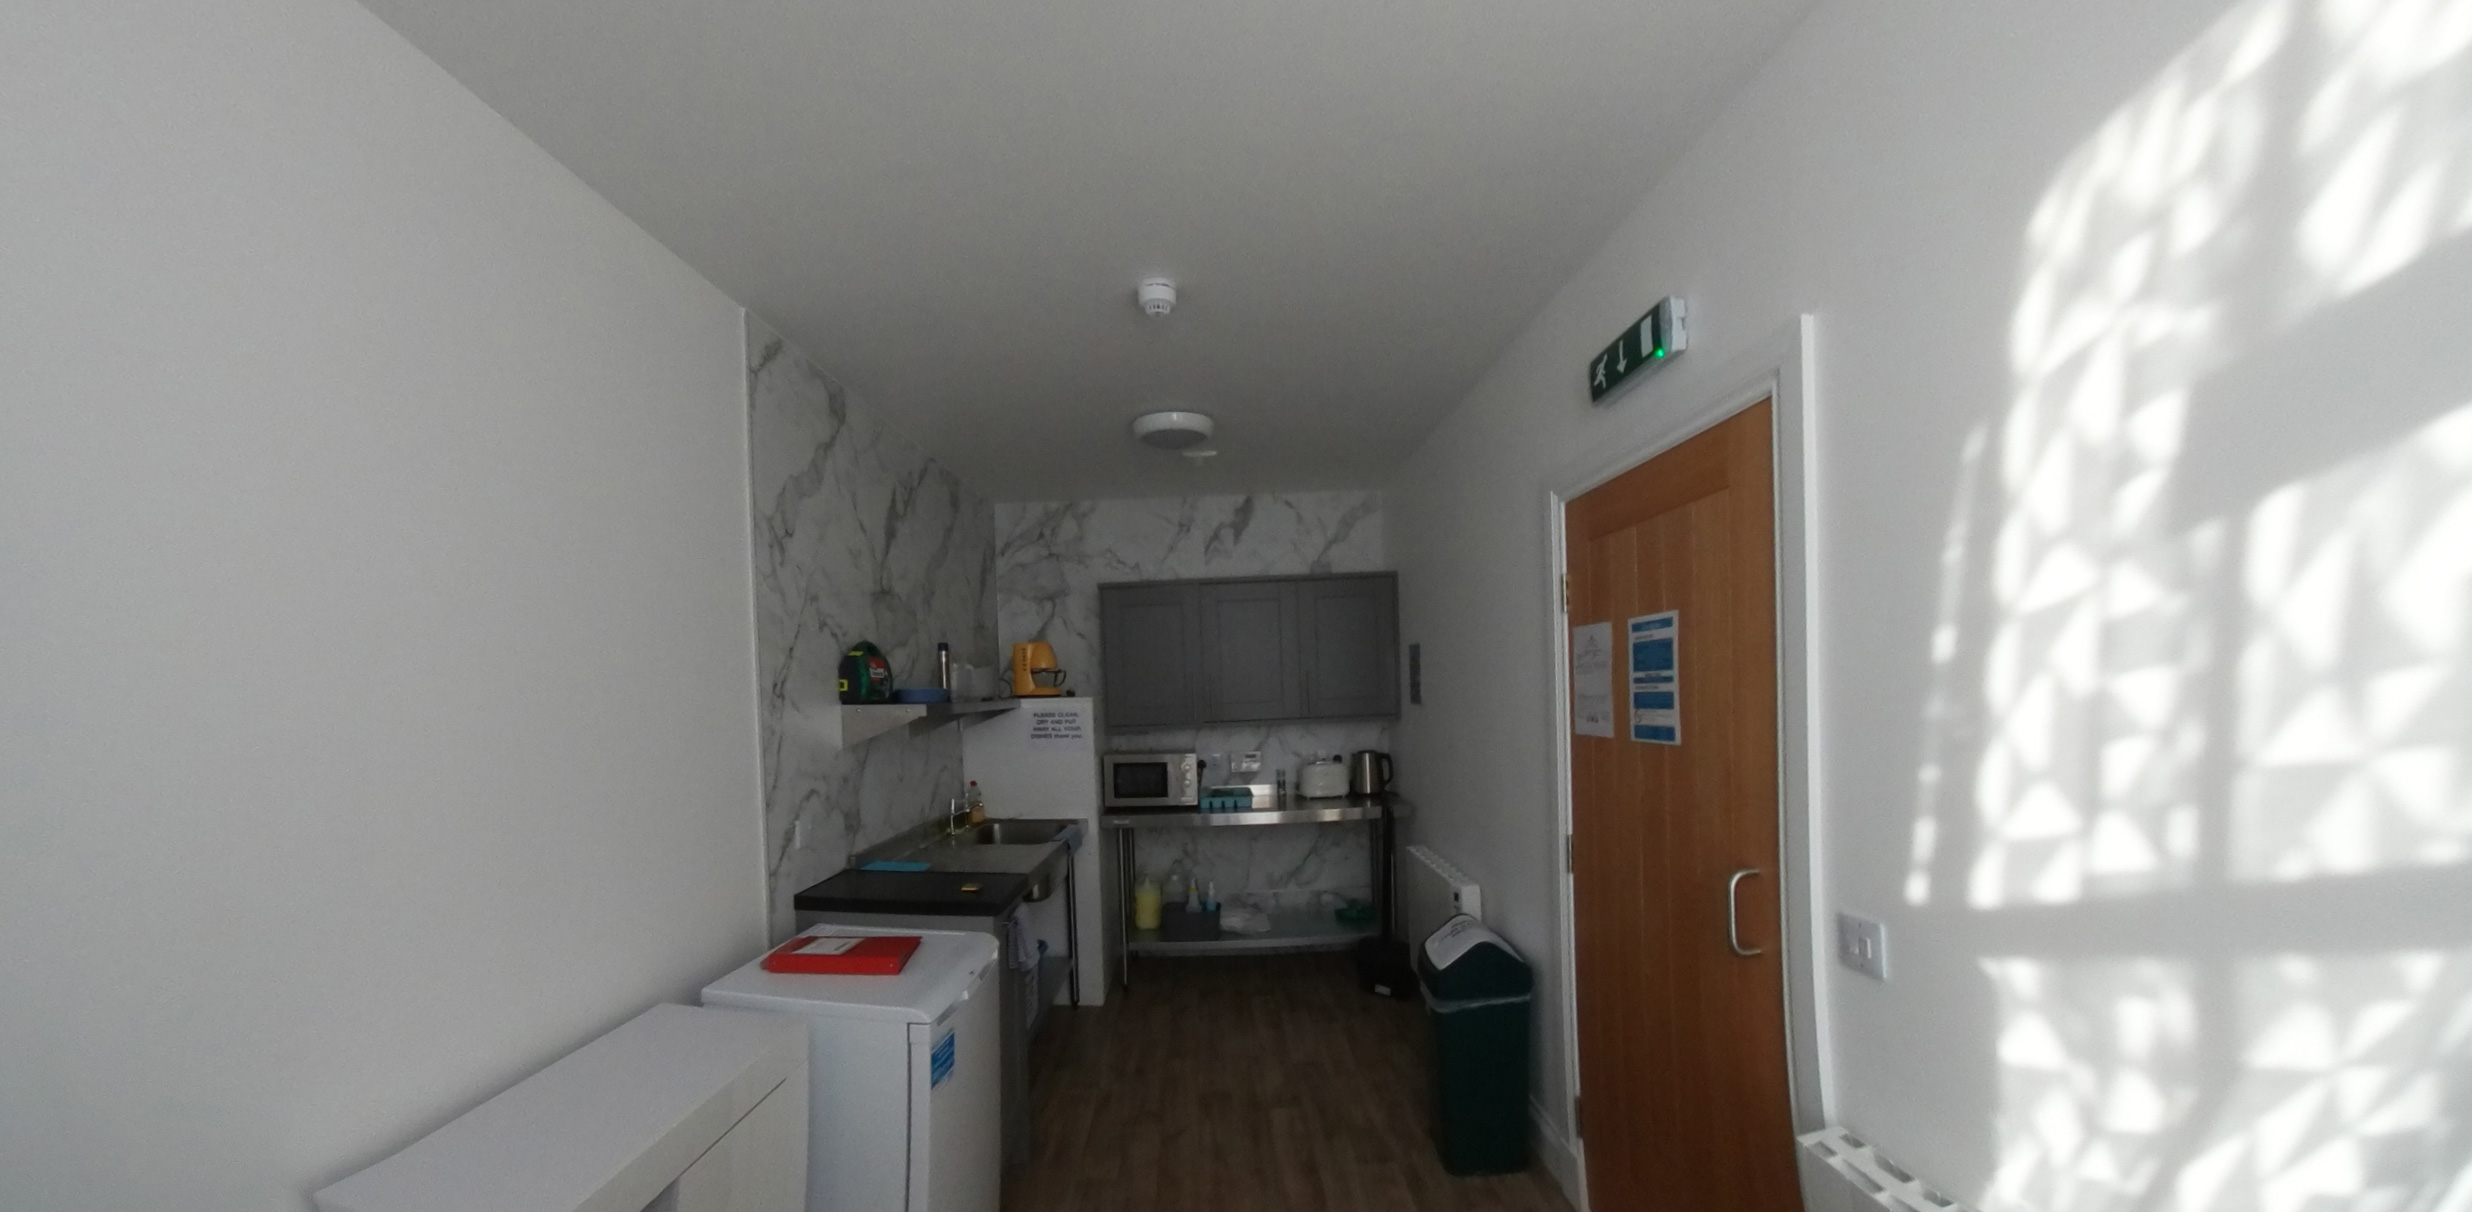 Photo of kitchen area with sink, work surface and bin